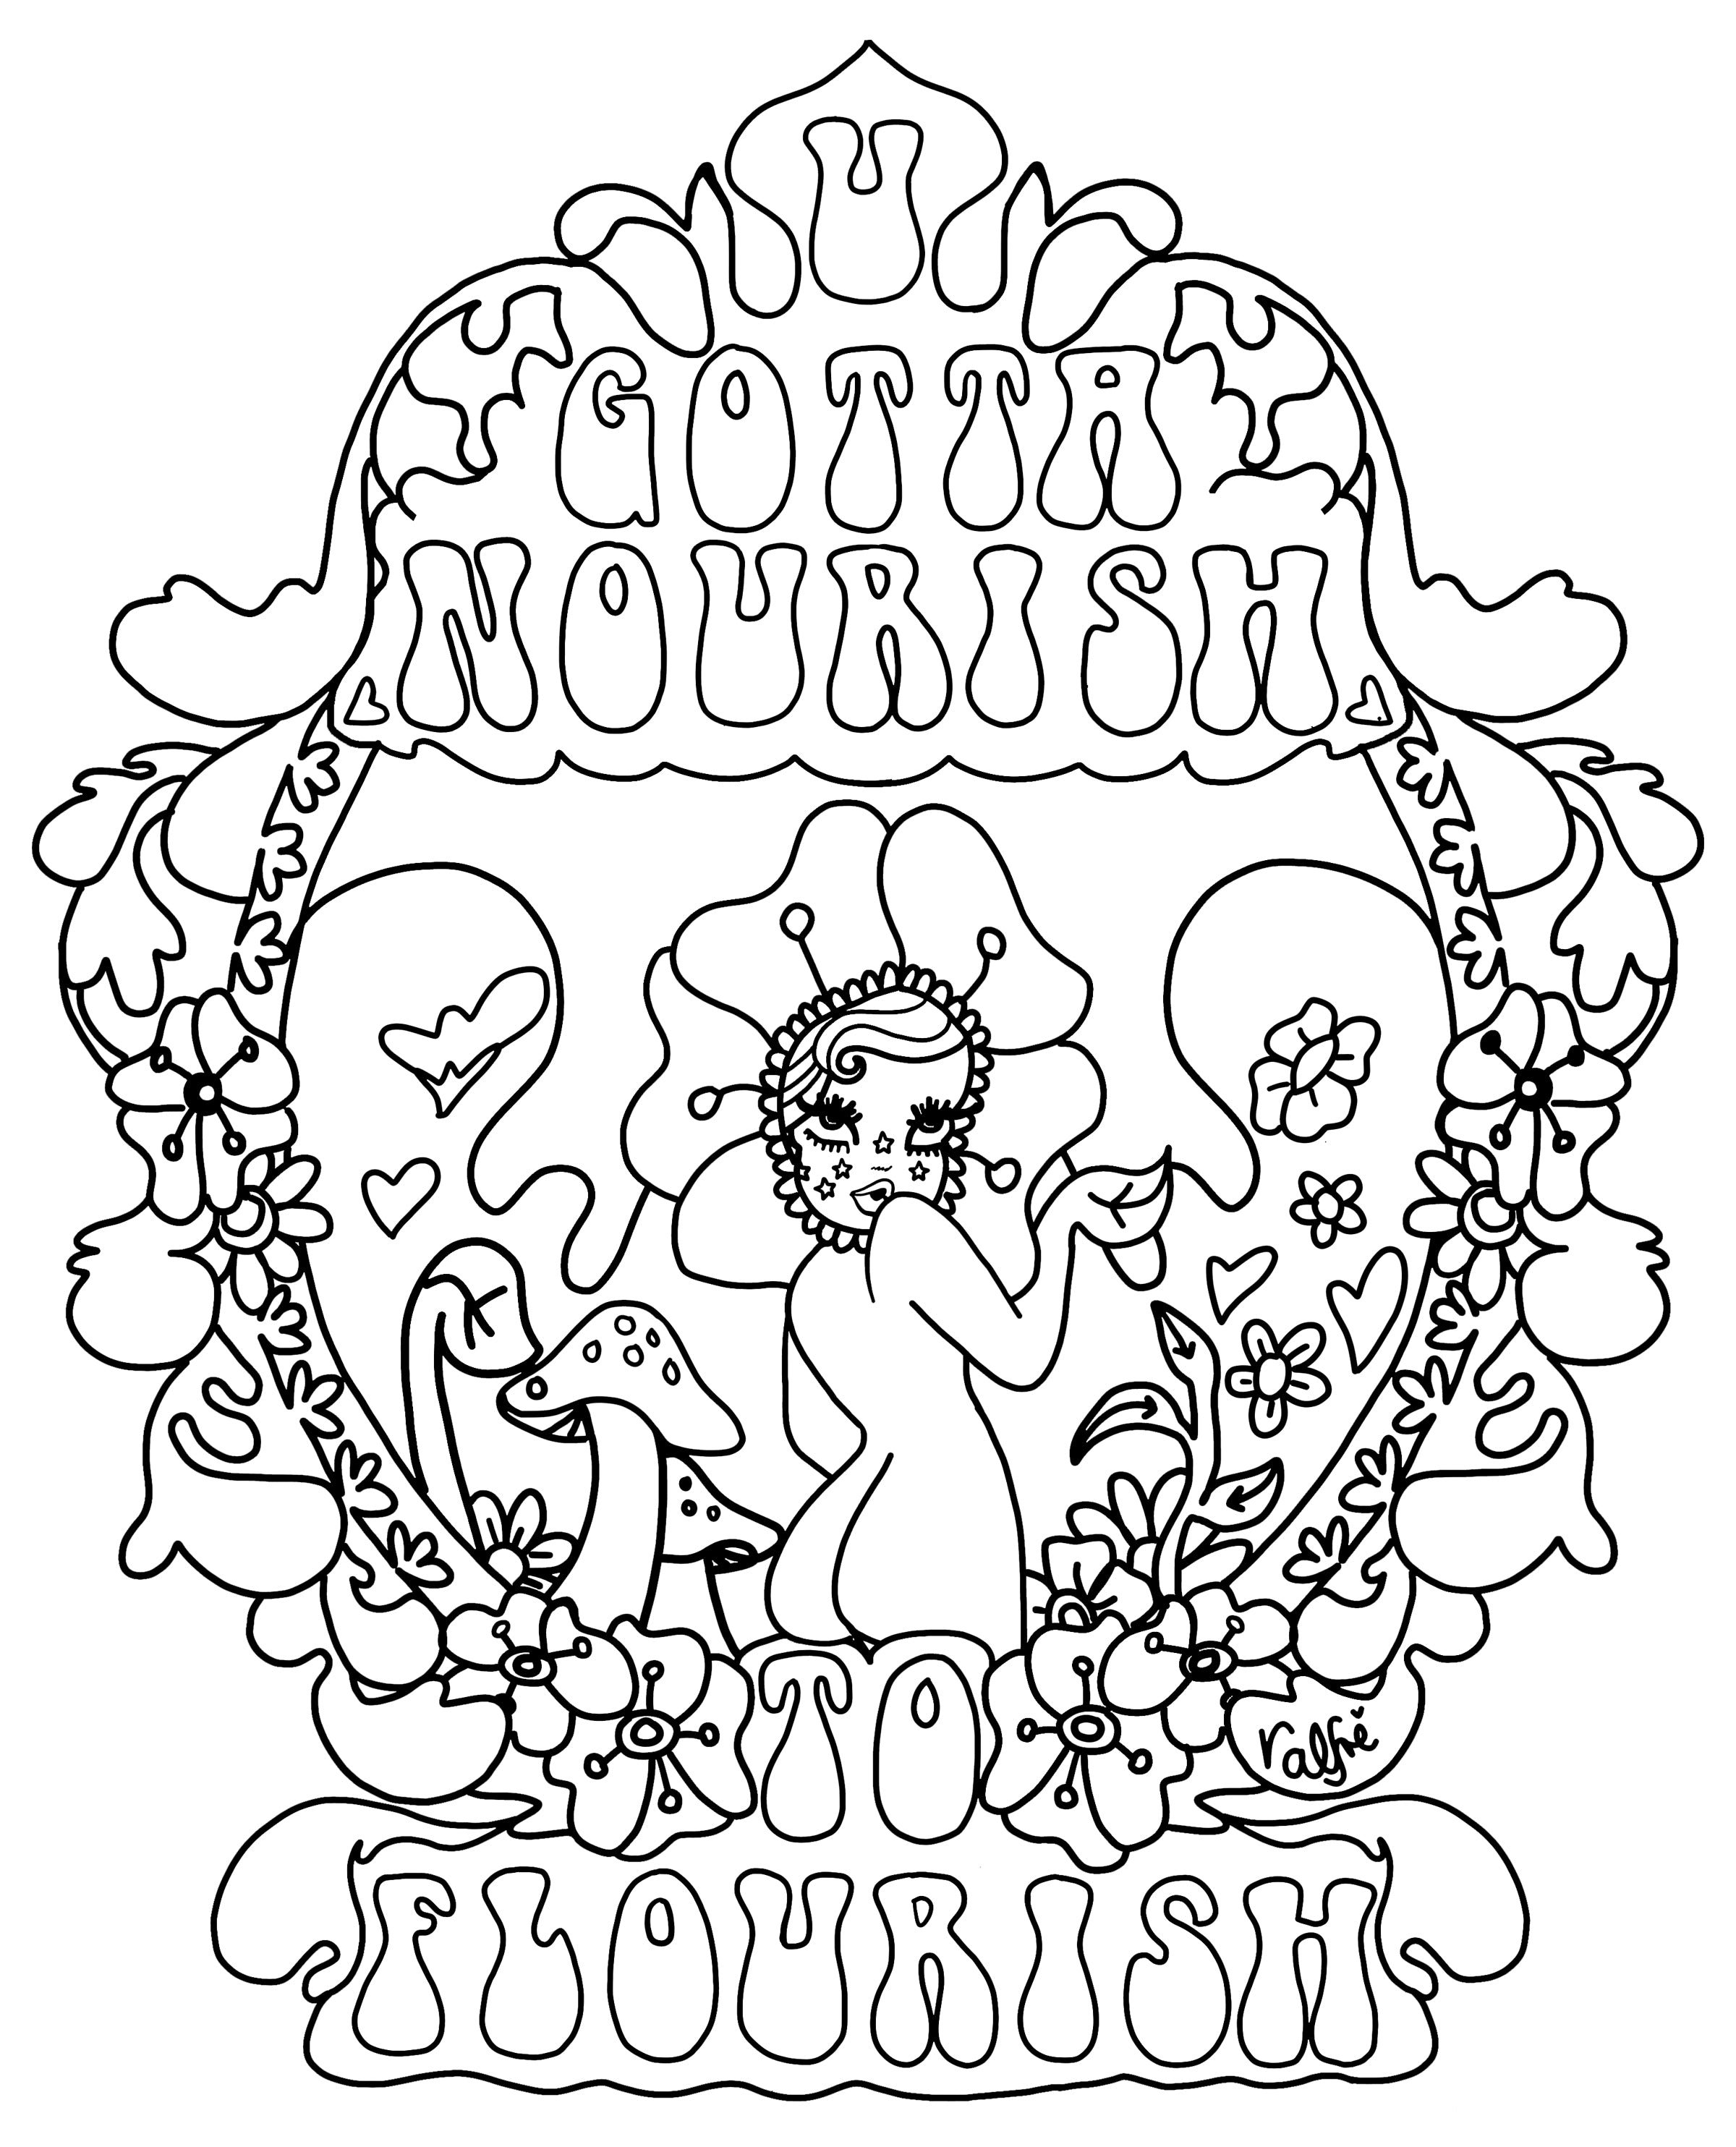 19 Weed Coloring Pages For Adults - Printable Coloring Pages